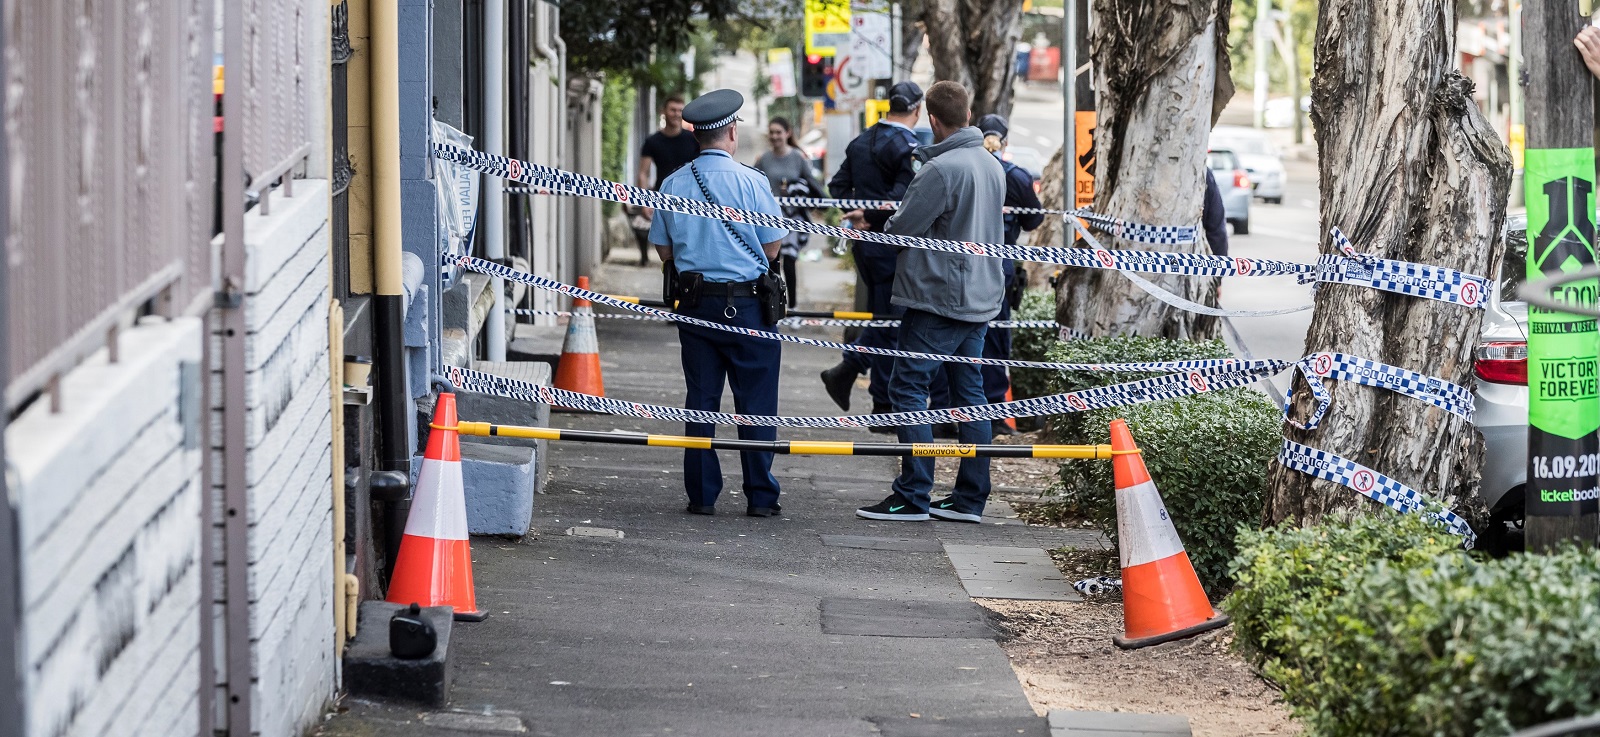 Police raided four Sydney houses and arrested four men over an alleged terror plot on 31 July. (Photo: Brook Mitchell/Getty Images)